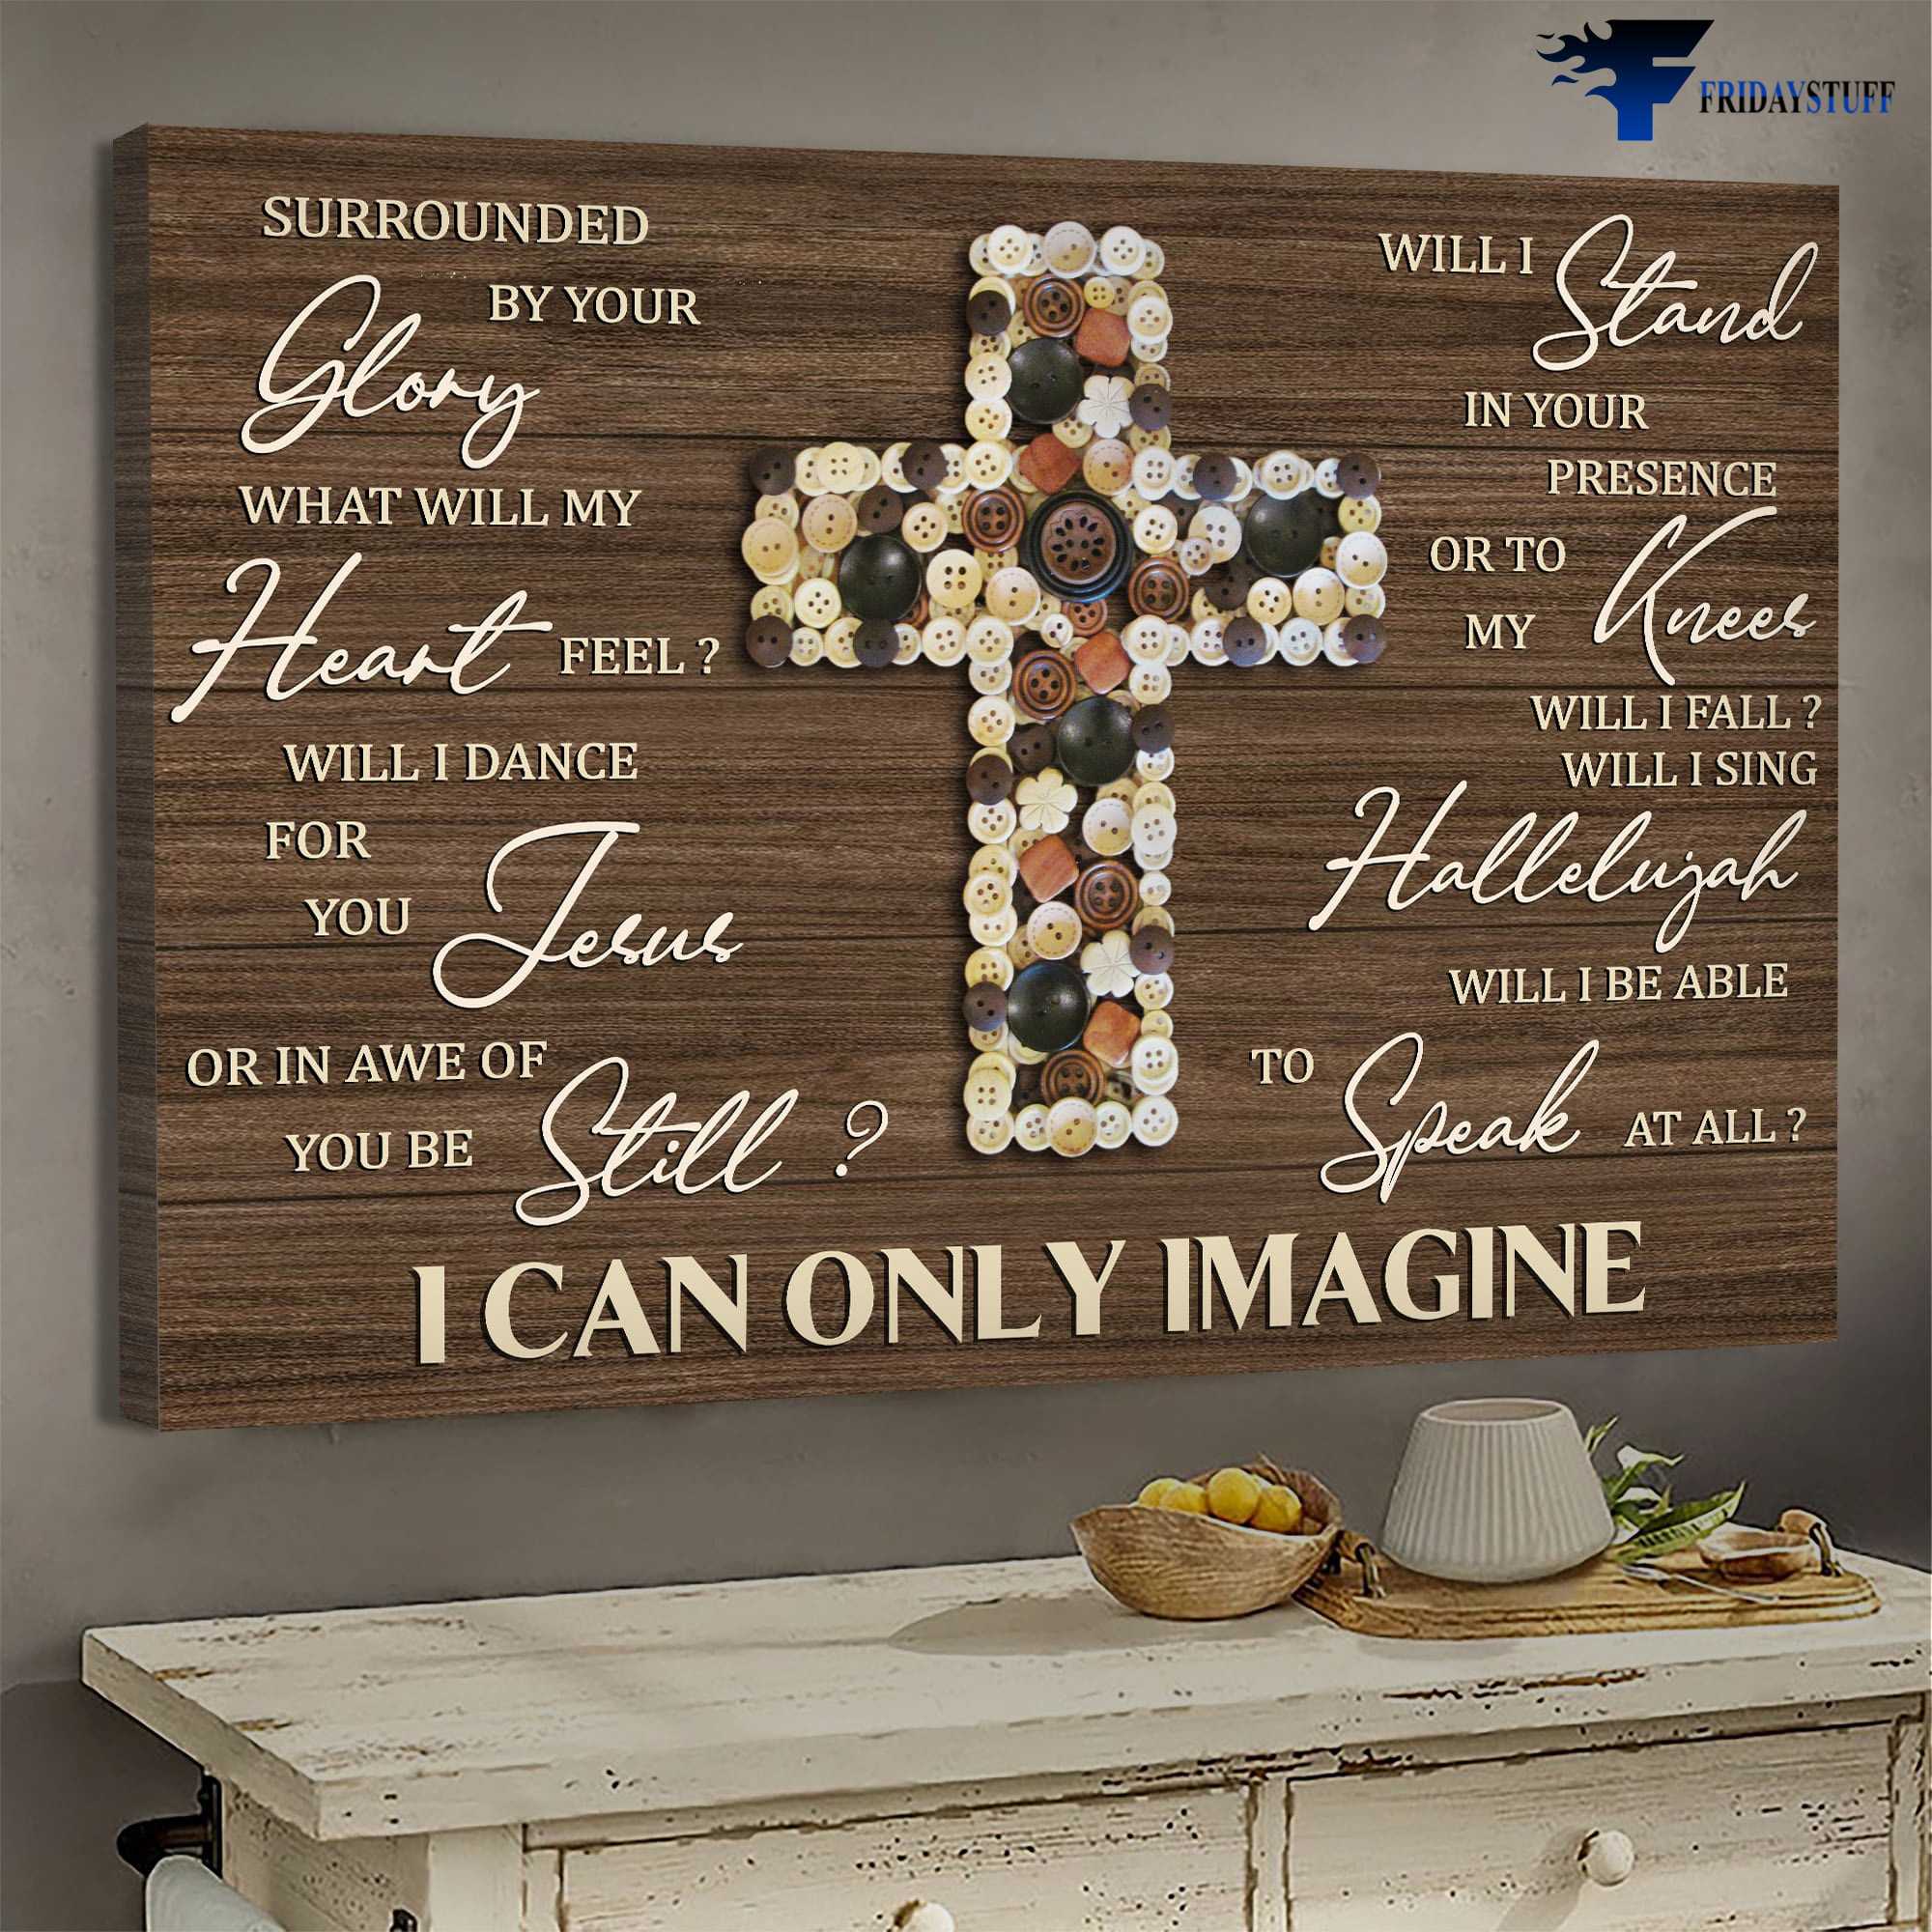 Button Crucifix, God Cross - Surrounded By Your Glory, What Will My Heart Feel, Will I Dance For You Jesus, Or In Awe Of You Be Still, Will I Stand In Your Presence, I Can Only Imagine